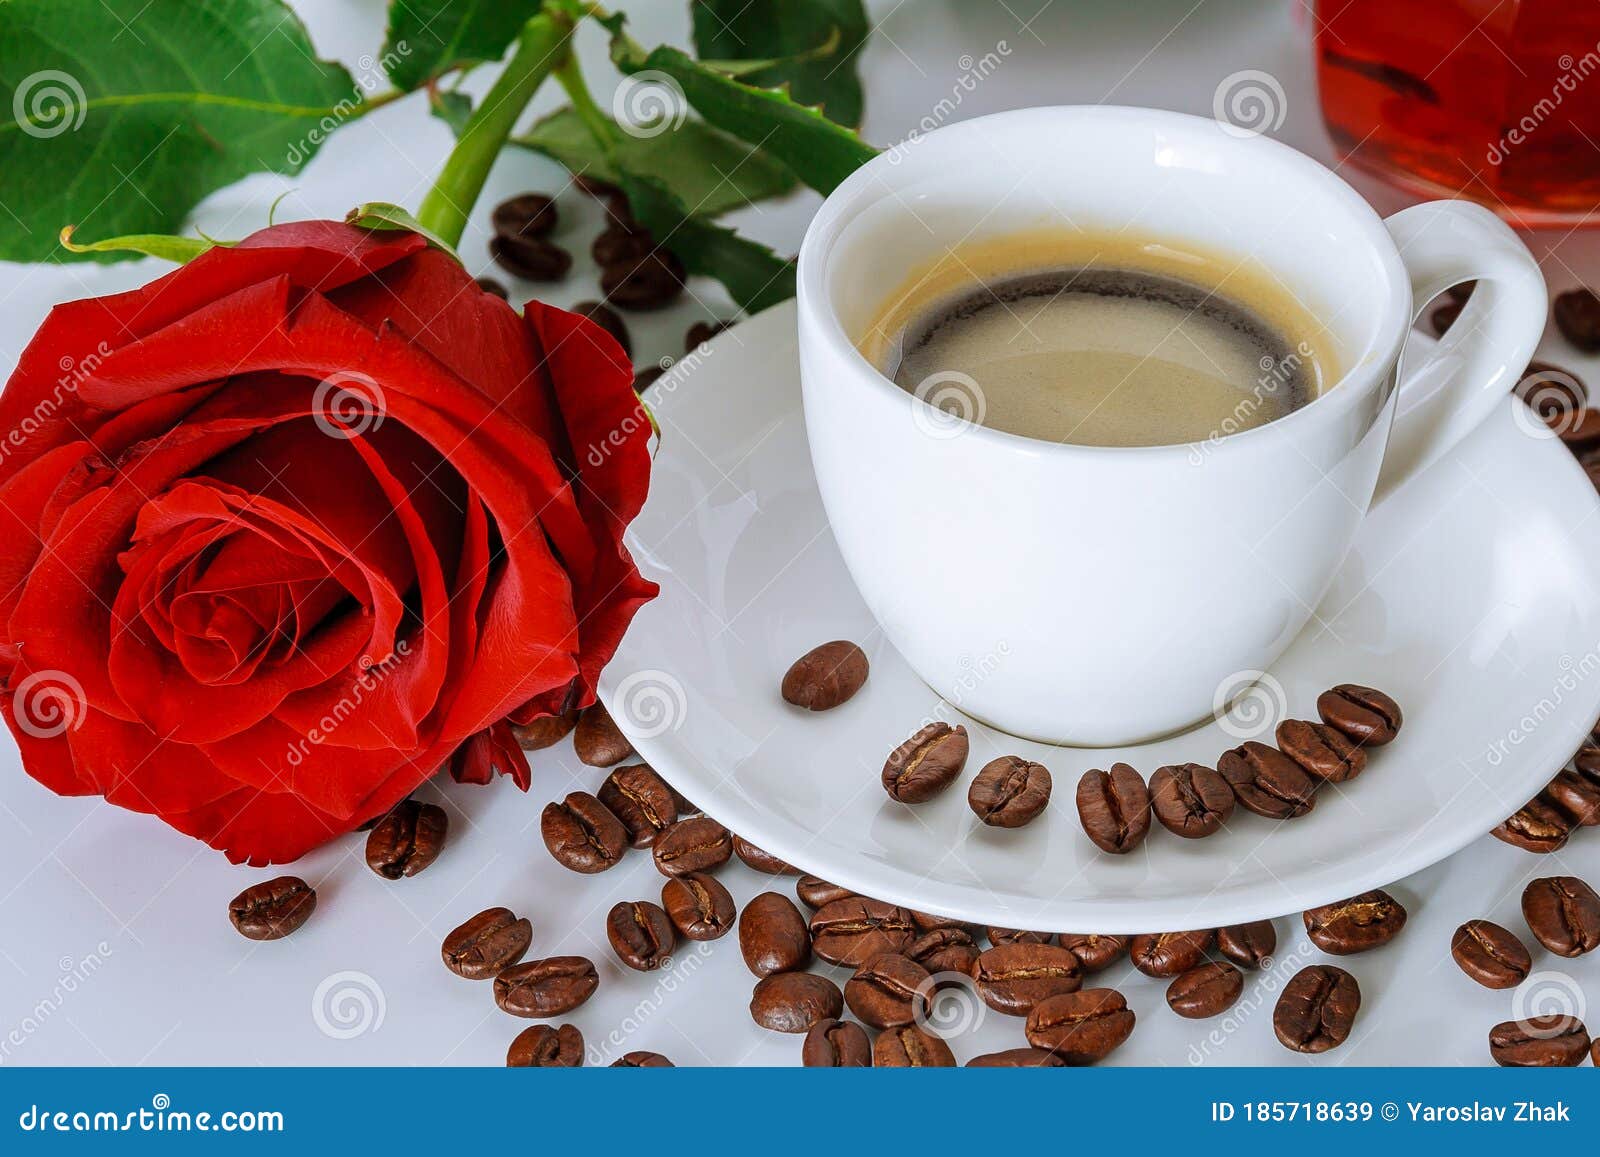 Cup of Coffee and a Bouquet of Red Roses. Coffee Beans Scattered ...